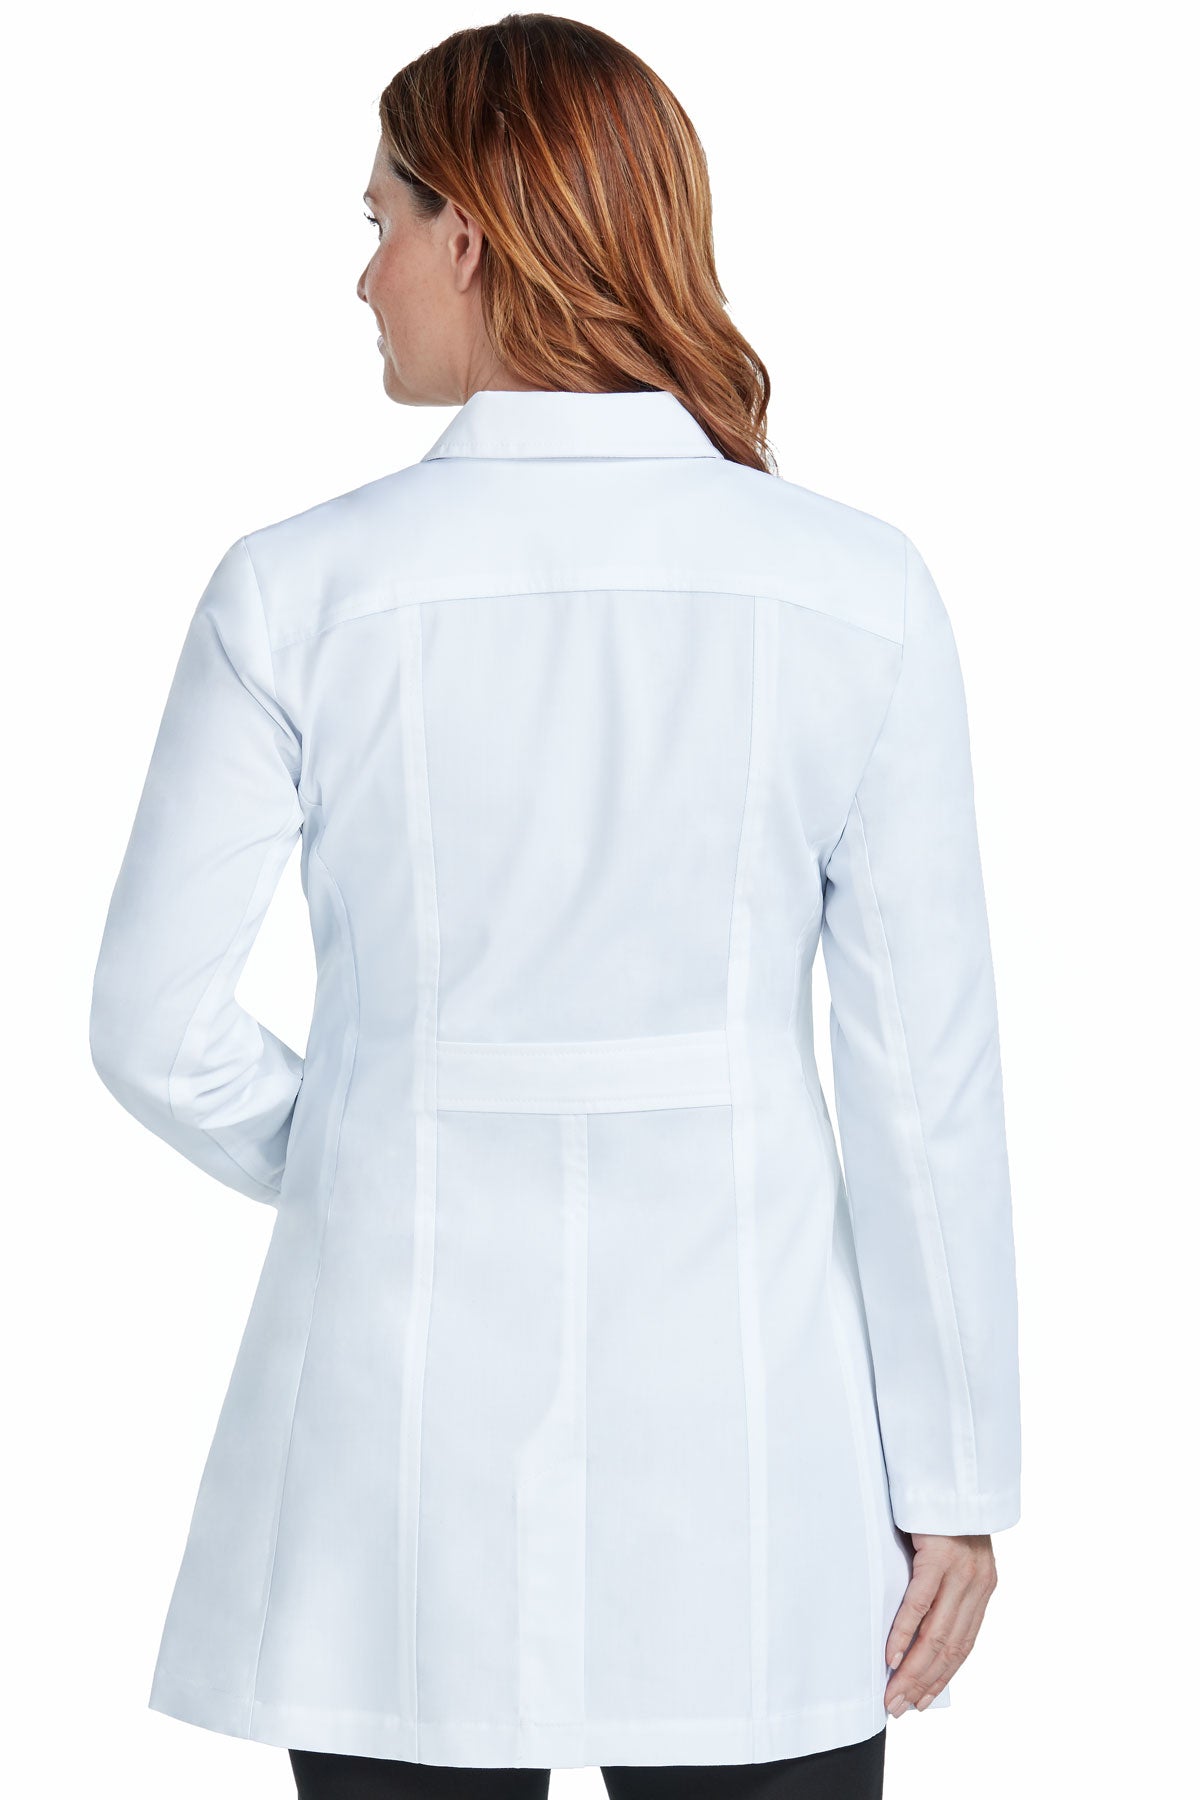 MED COUTURE Tailored Length Lab Coat